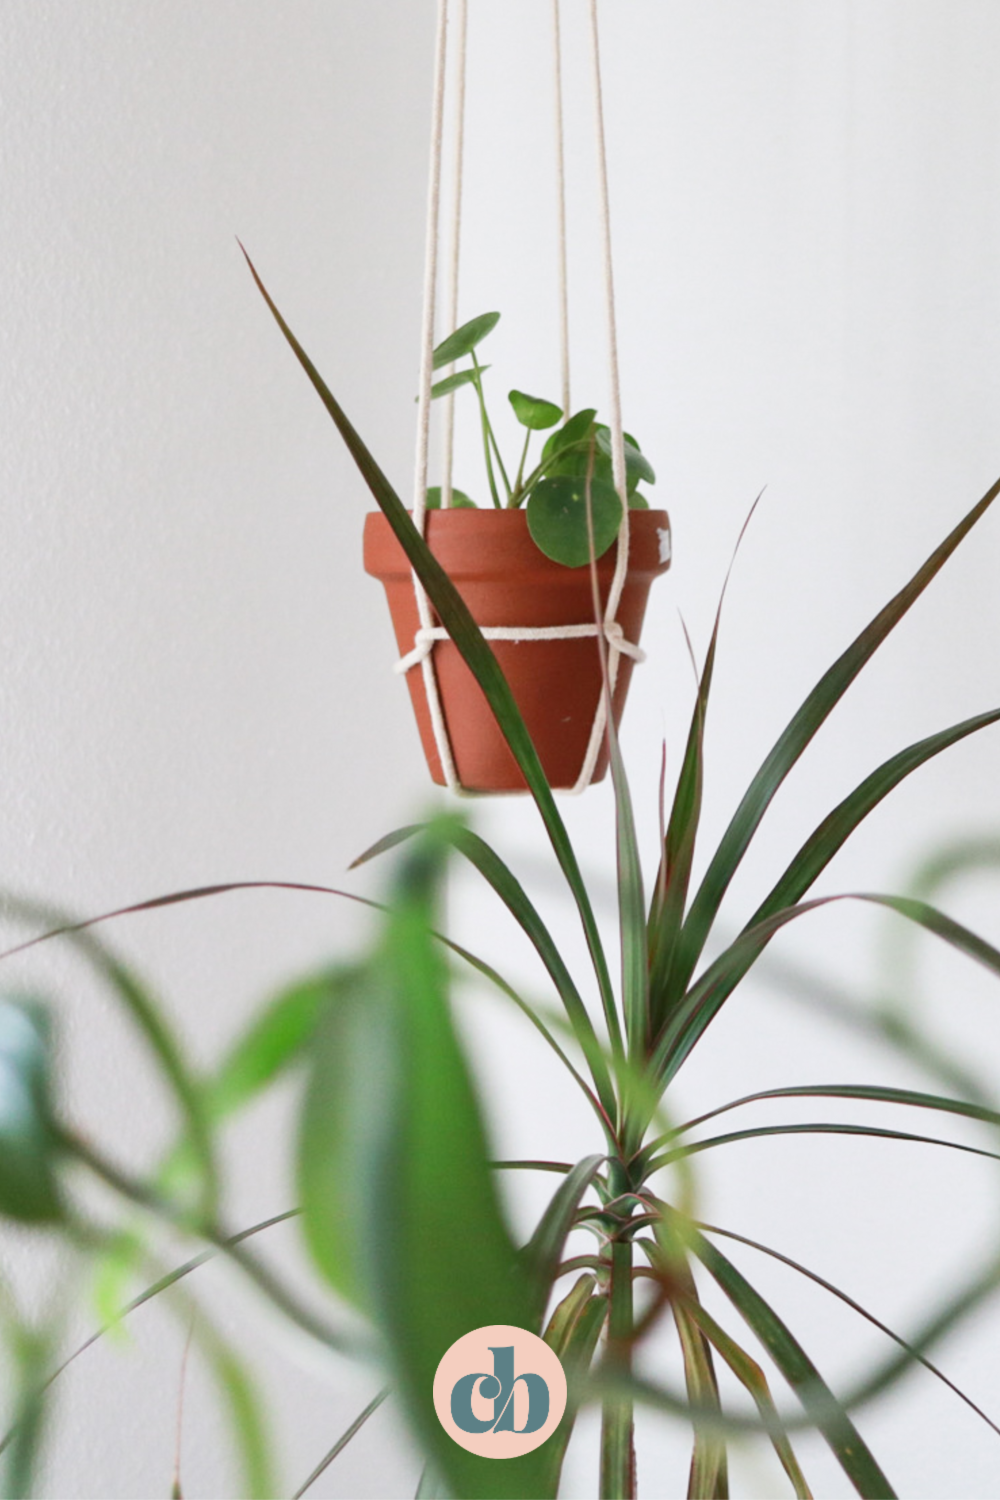 Learn how to make this simple, beautiful DIY plant hanger with just one knot! Clever Bloom